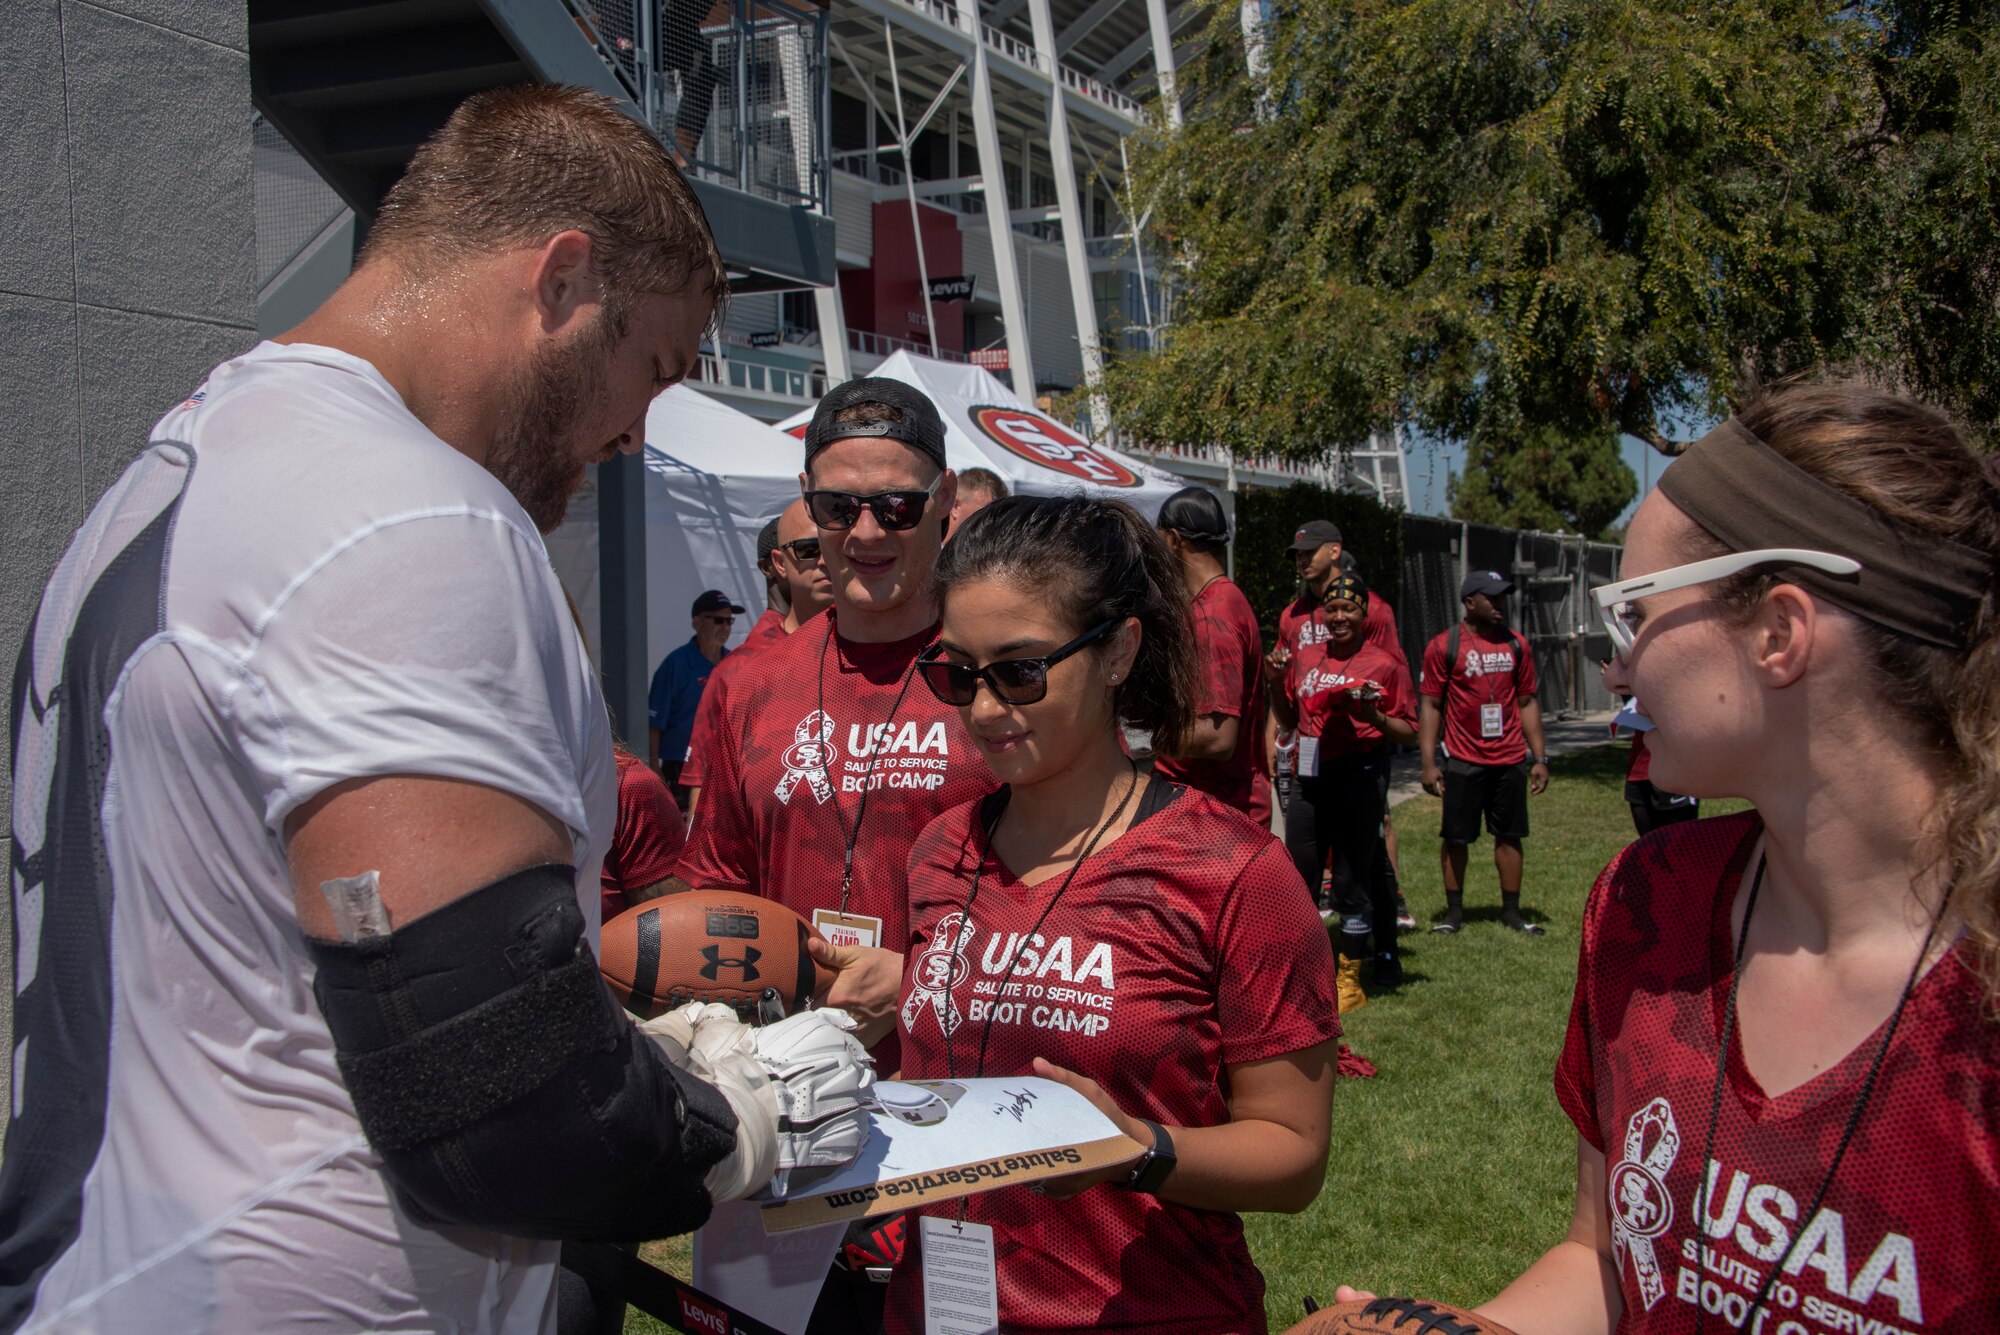 San Francisco 49ers offensive lineman Ben Garland signs autographs for Airmen from Travis Air Force Base, California, Aug. 13, 2019, during the Salute to Service Boot Camp event in Santa Clara, California. The event provided Airmen with an opportunity to interact with NFL players and compete against one another in a variety of athletic drills. (U.S. Air Force photo by Tech. Sgt. James Hodgman)